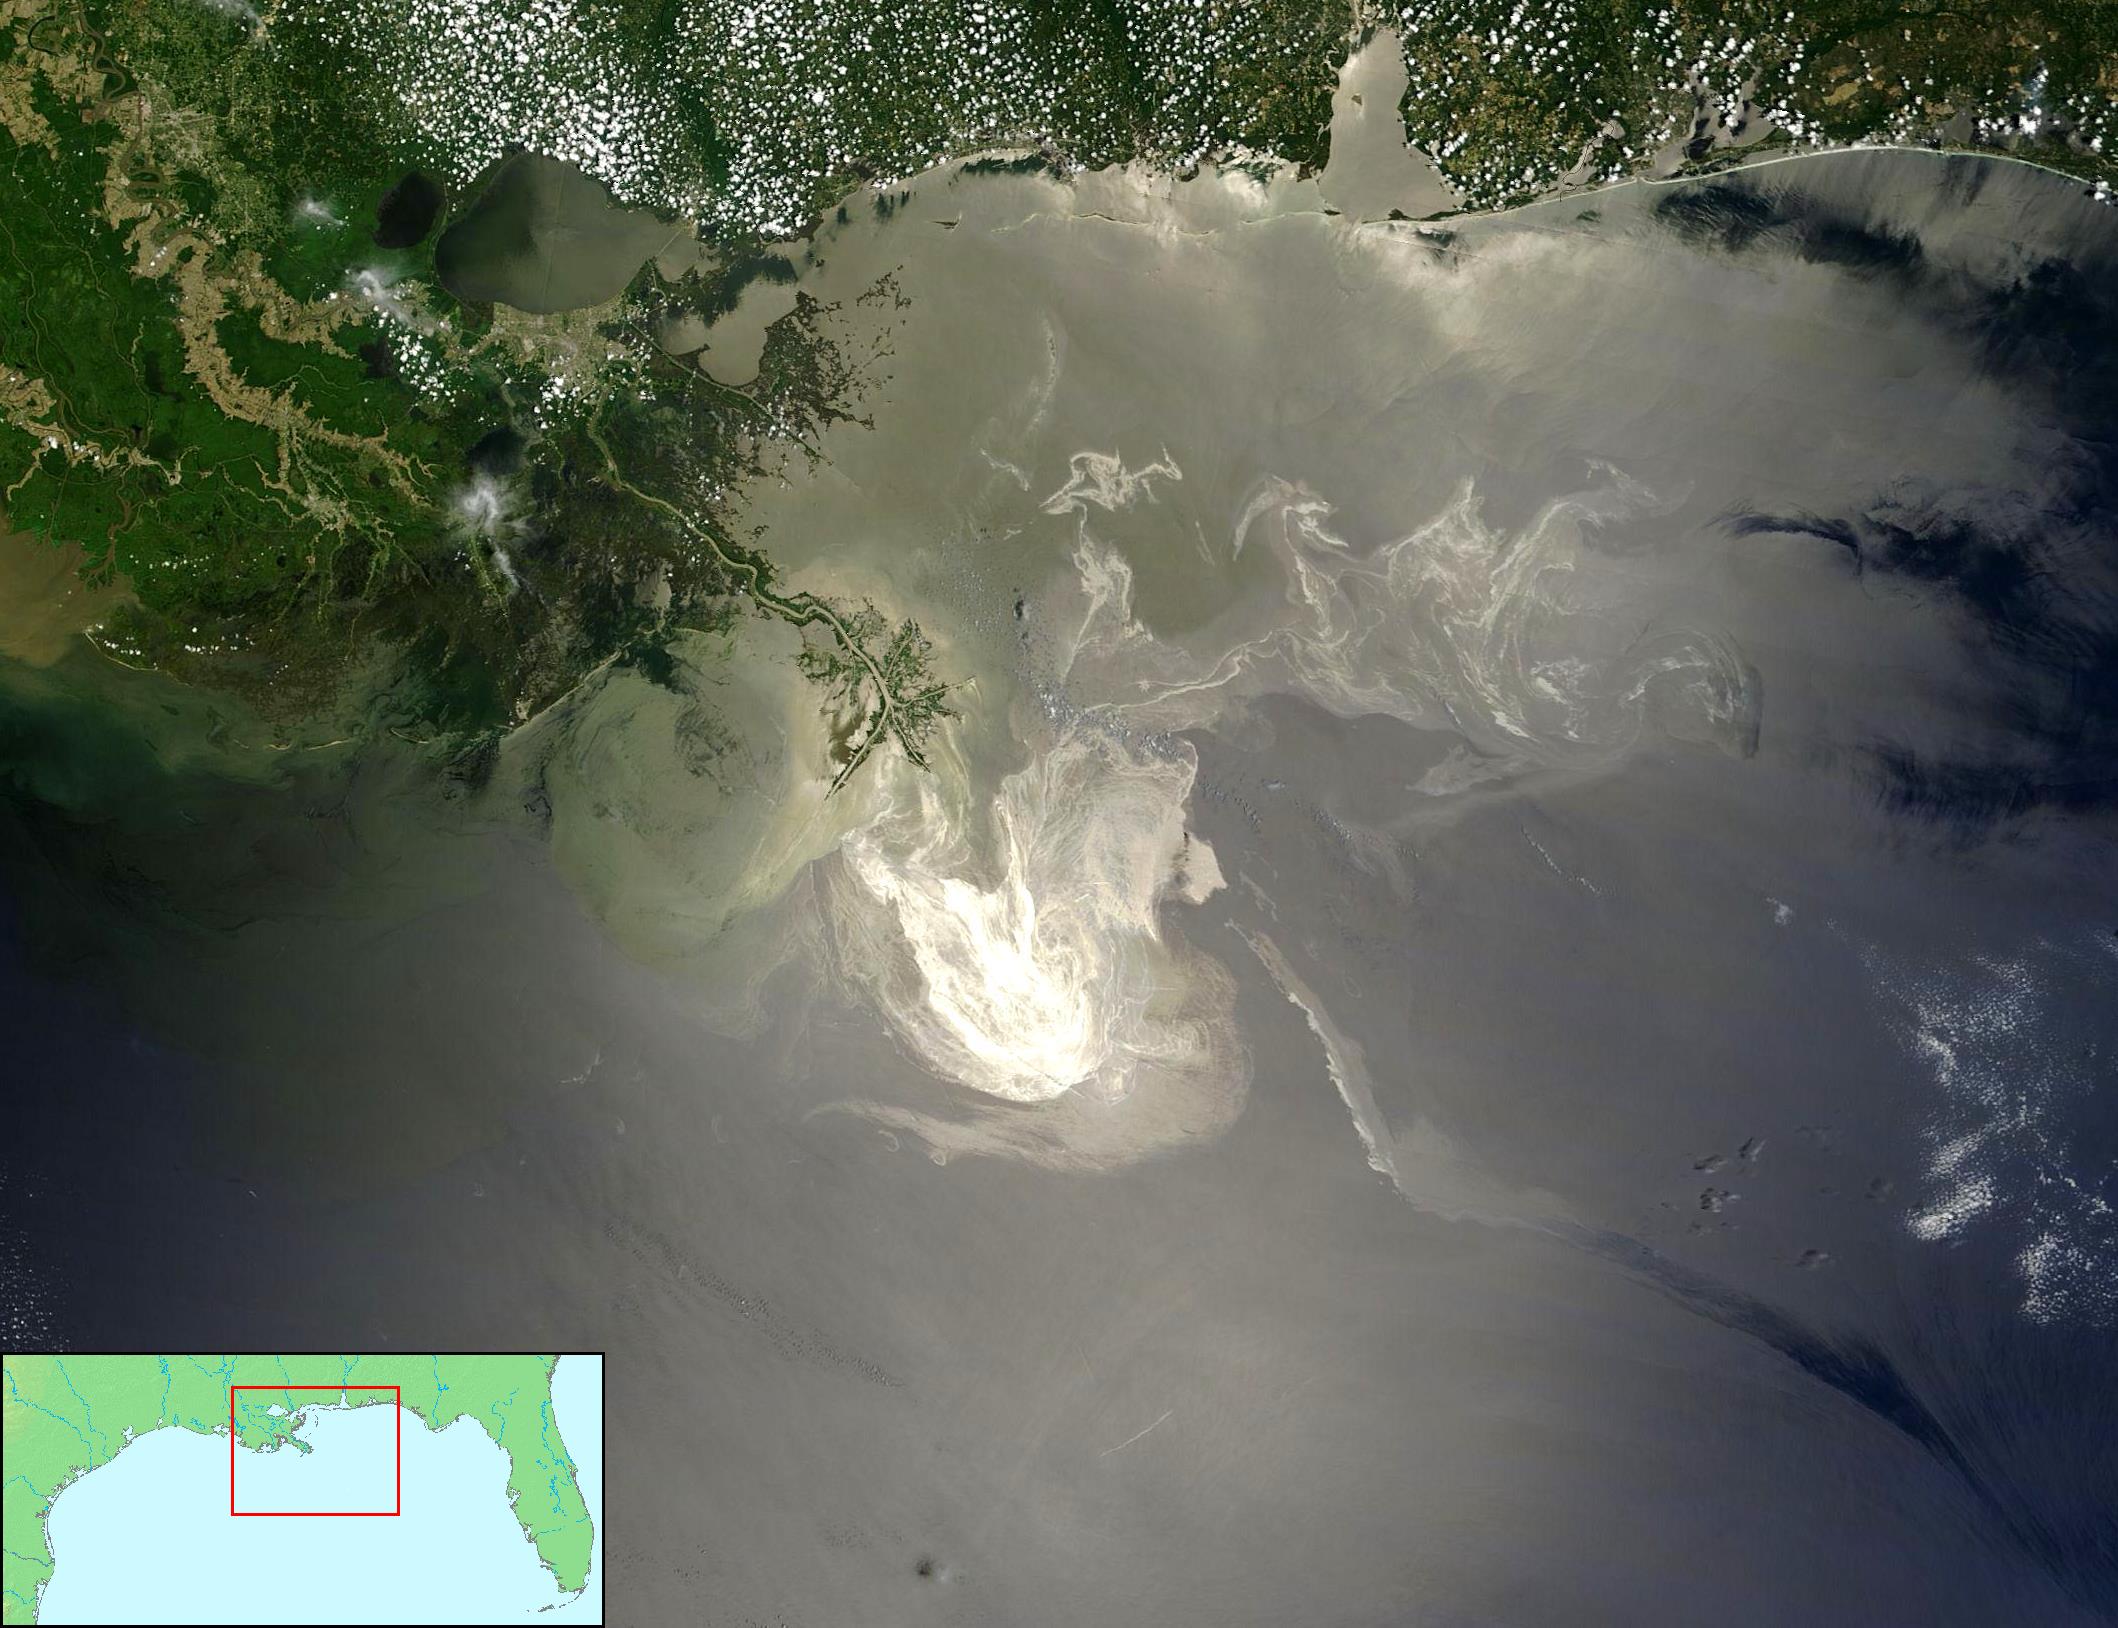 Deepwater_Horizon_oil_spill_-_May_24%2C_2010_-_with_locator.jpg